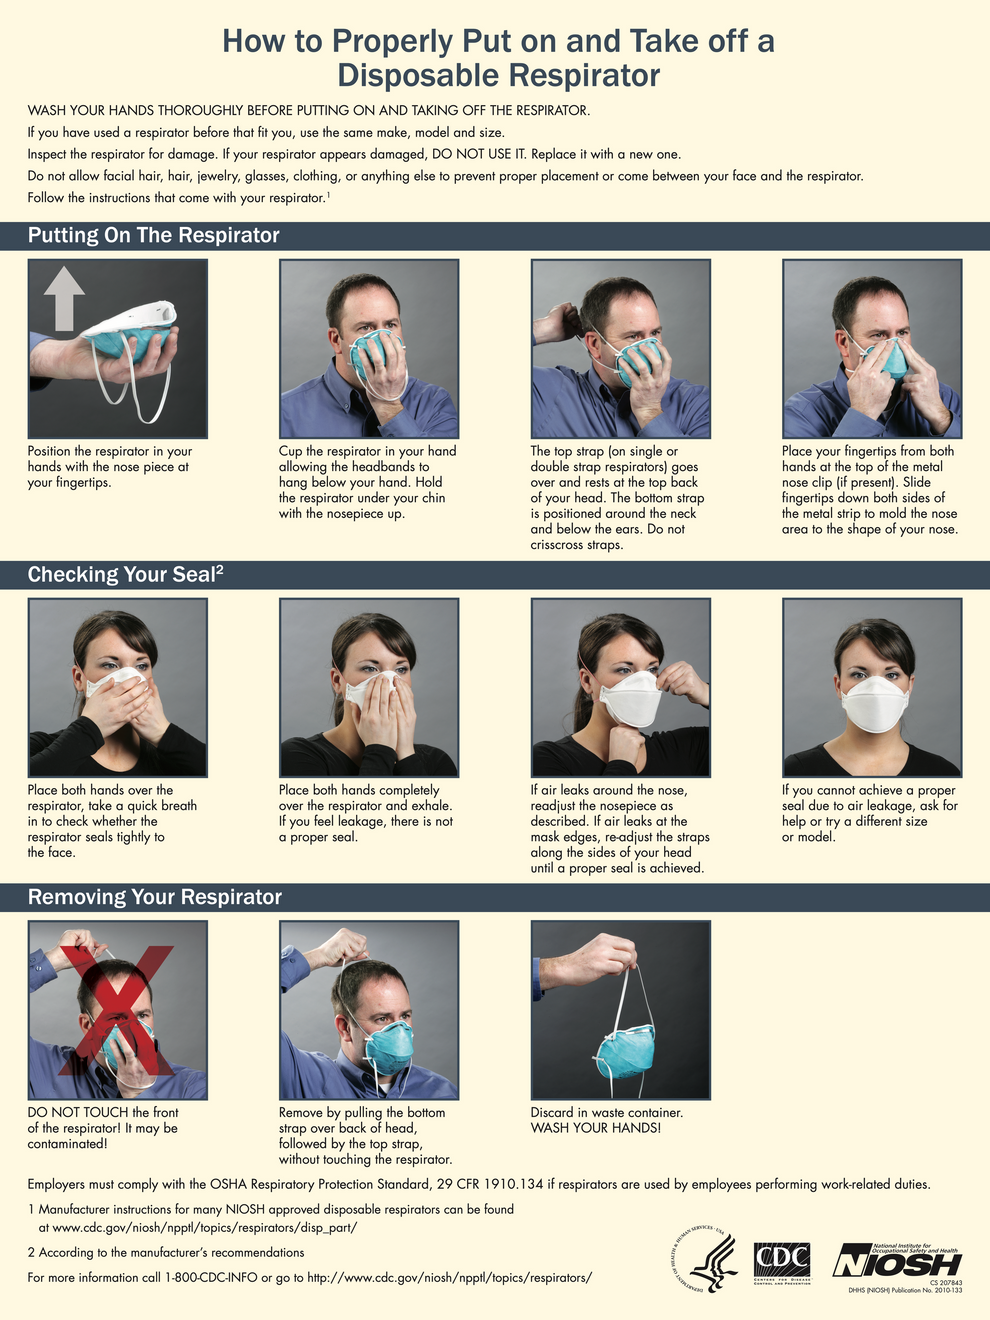 N95 Mask Wearing Instructions